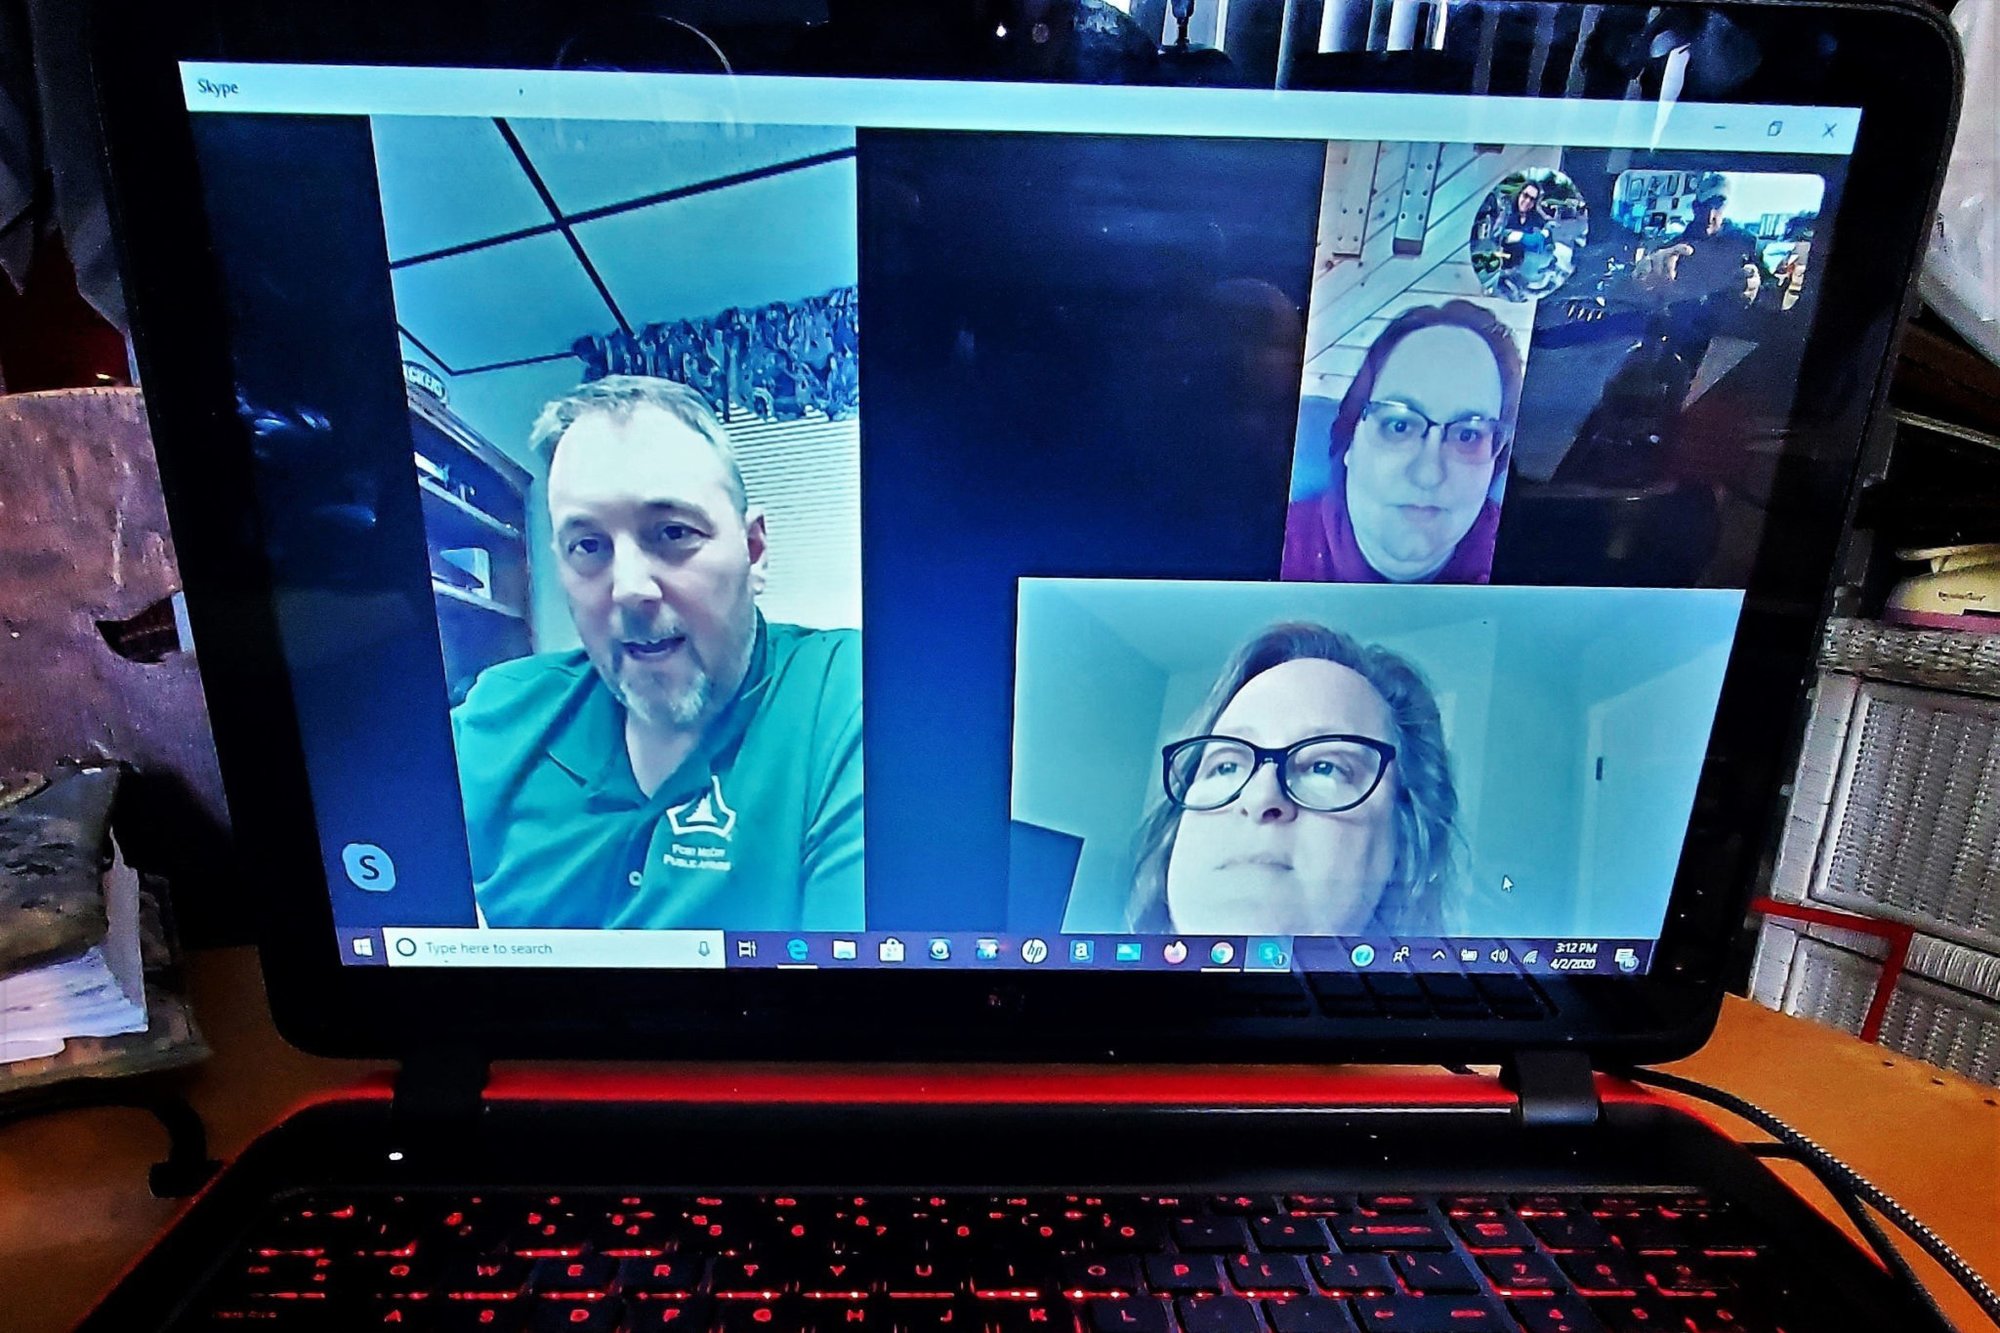 Army employees from Fort McCoy, Wis., holding an April 14, 2020, video teleconference as they telework during the COVID-19 pandemic illustrate that facetime doesn’t necessarily mean that everyone is in the same location. Graphic illustration by Scott Sturkol, DOD.